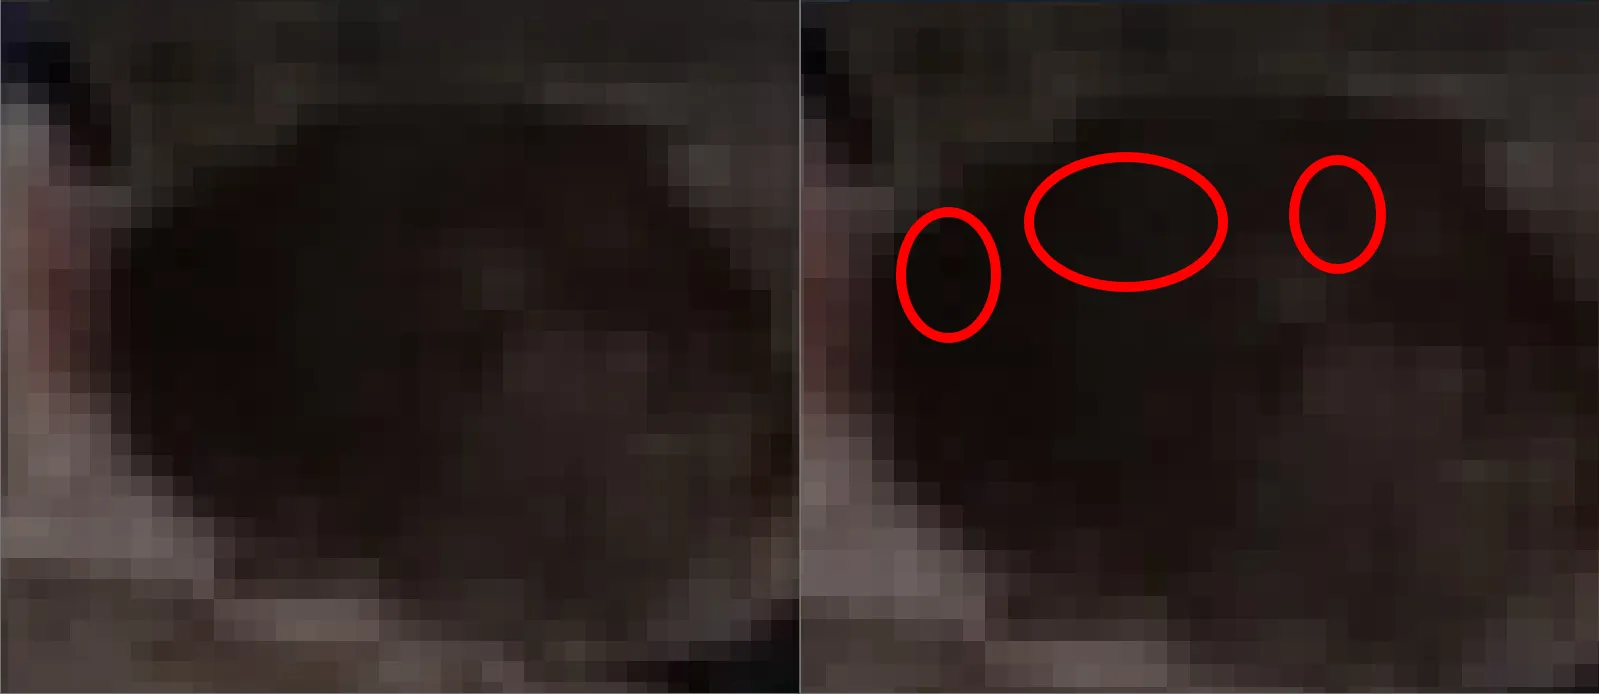 Enlarged fragment of the photo before and after recompression